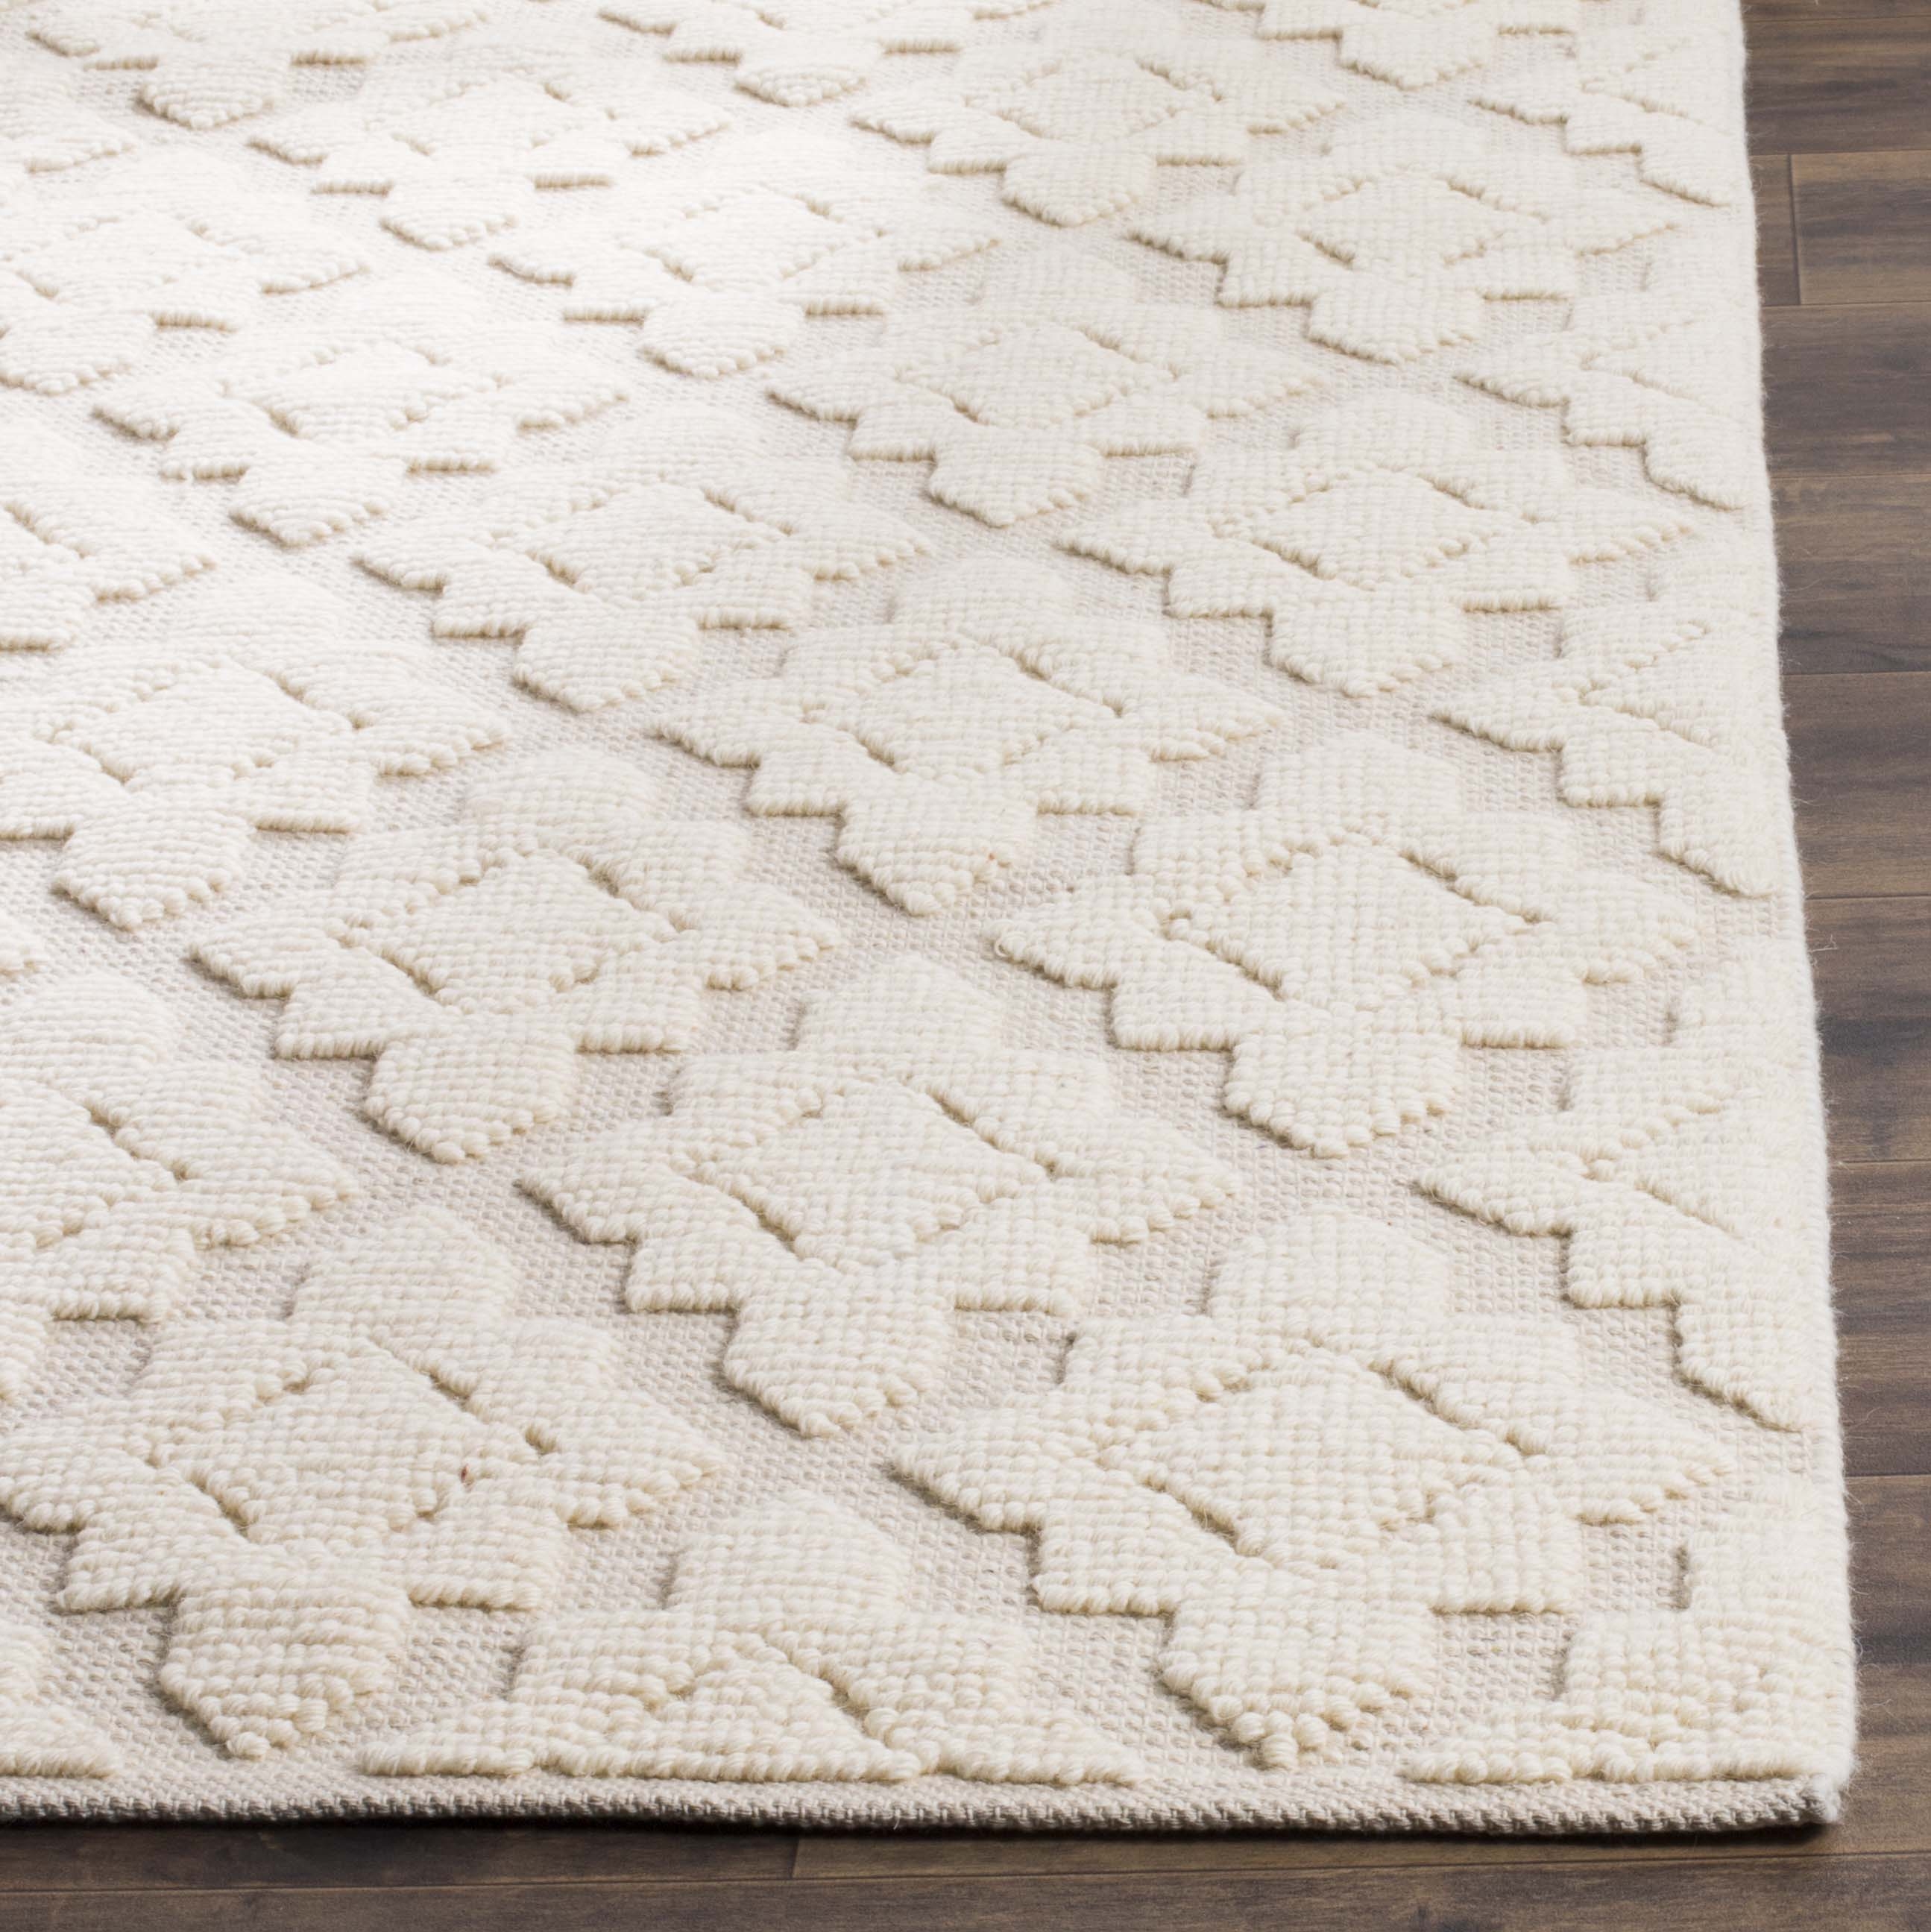 Arlo Home Hand Woven Area Rug, VRM103A, Ivory,  3' X 5' - Image 2